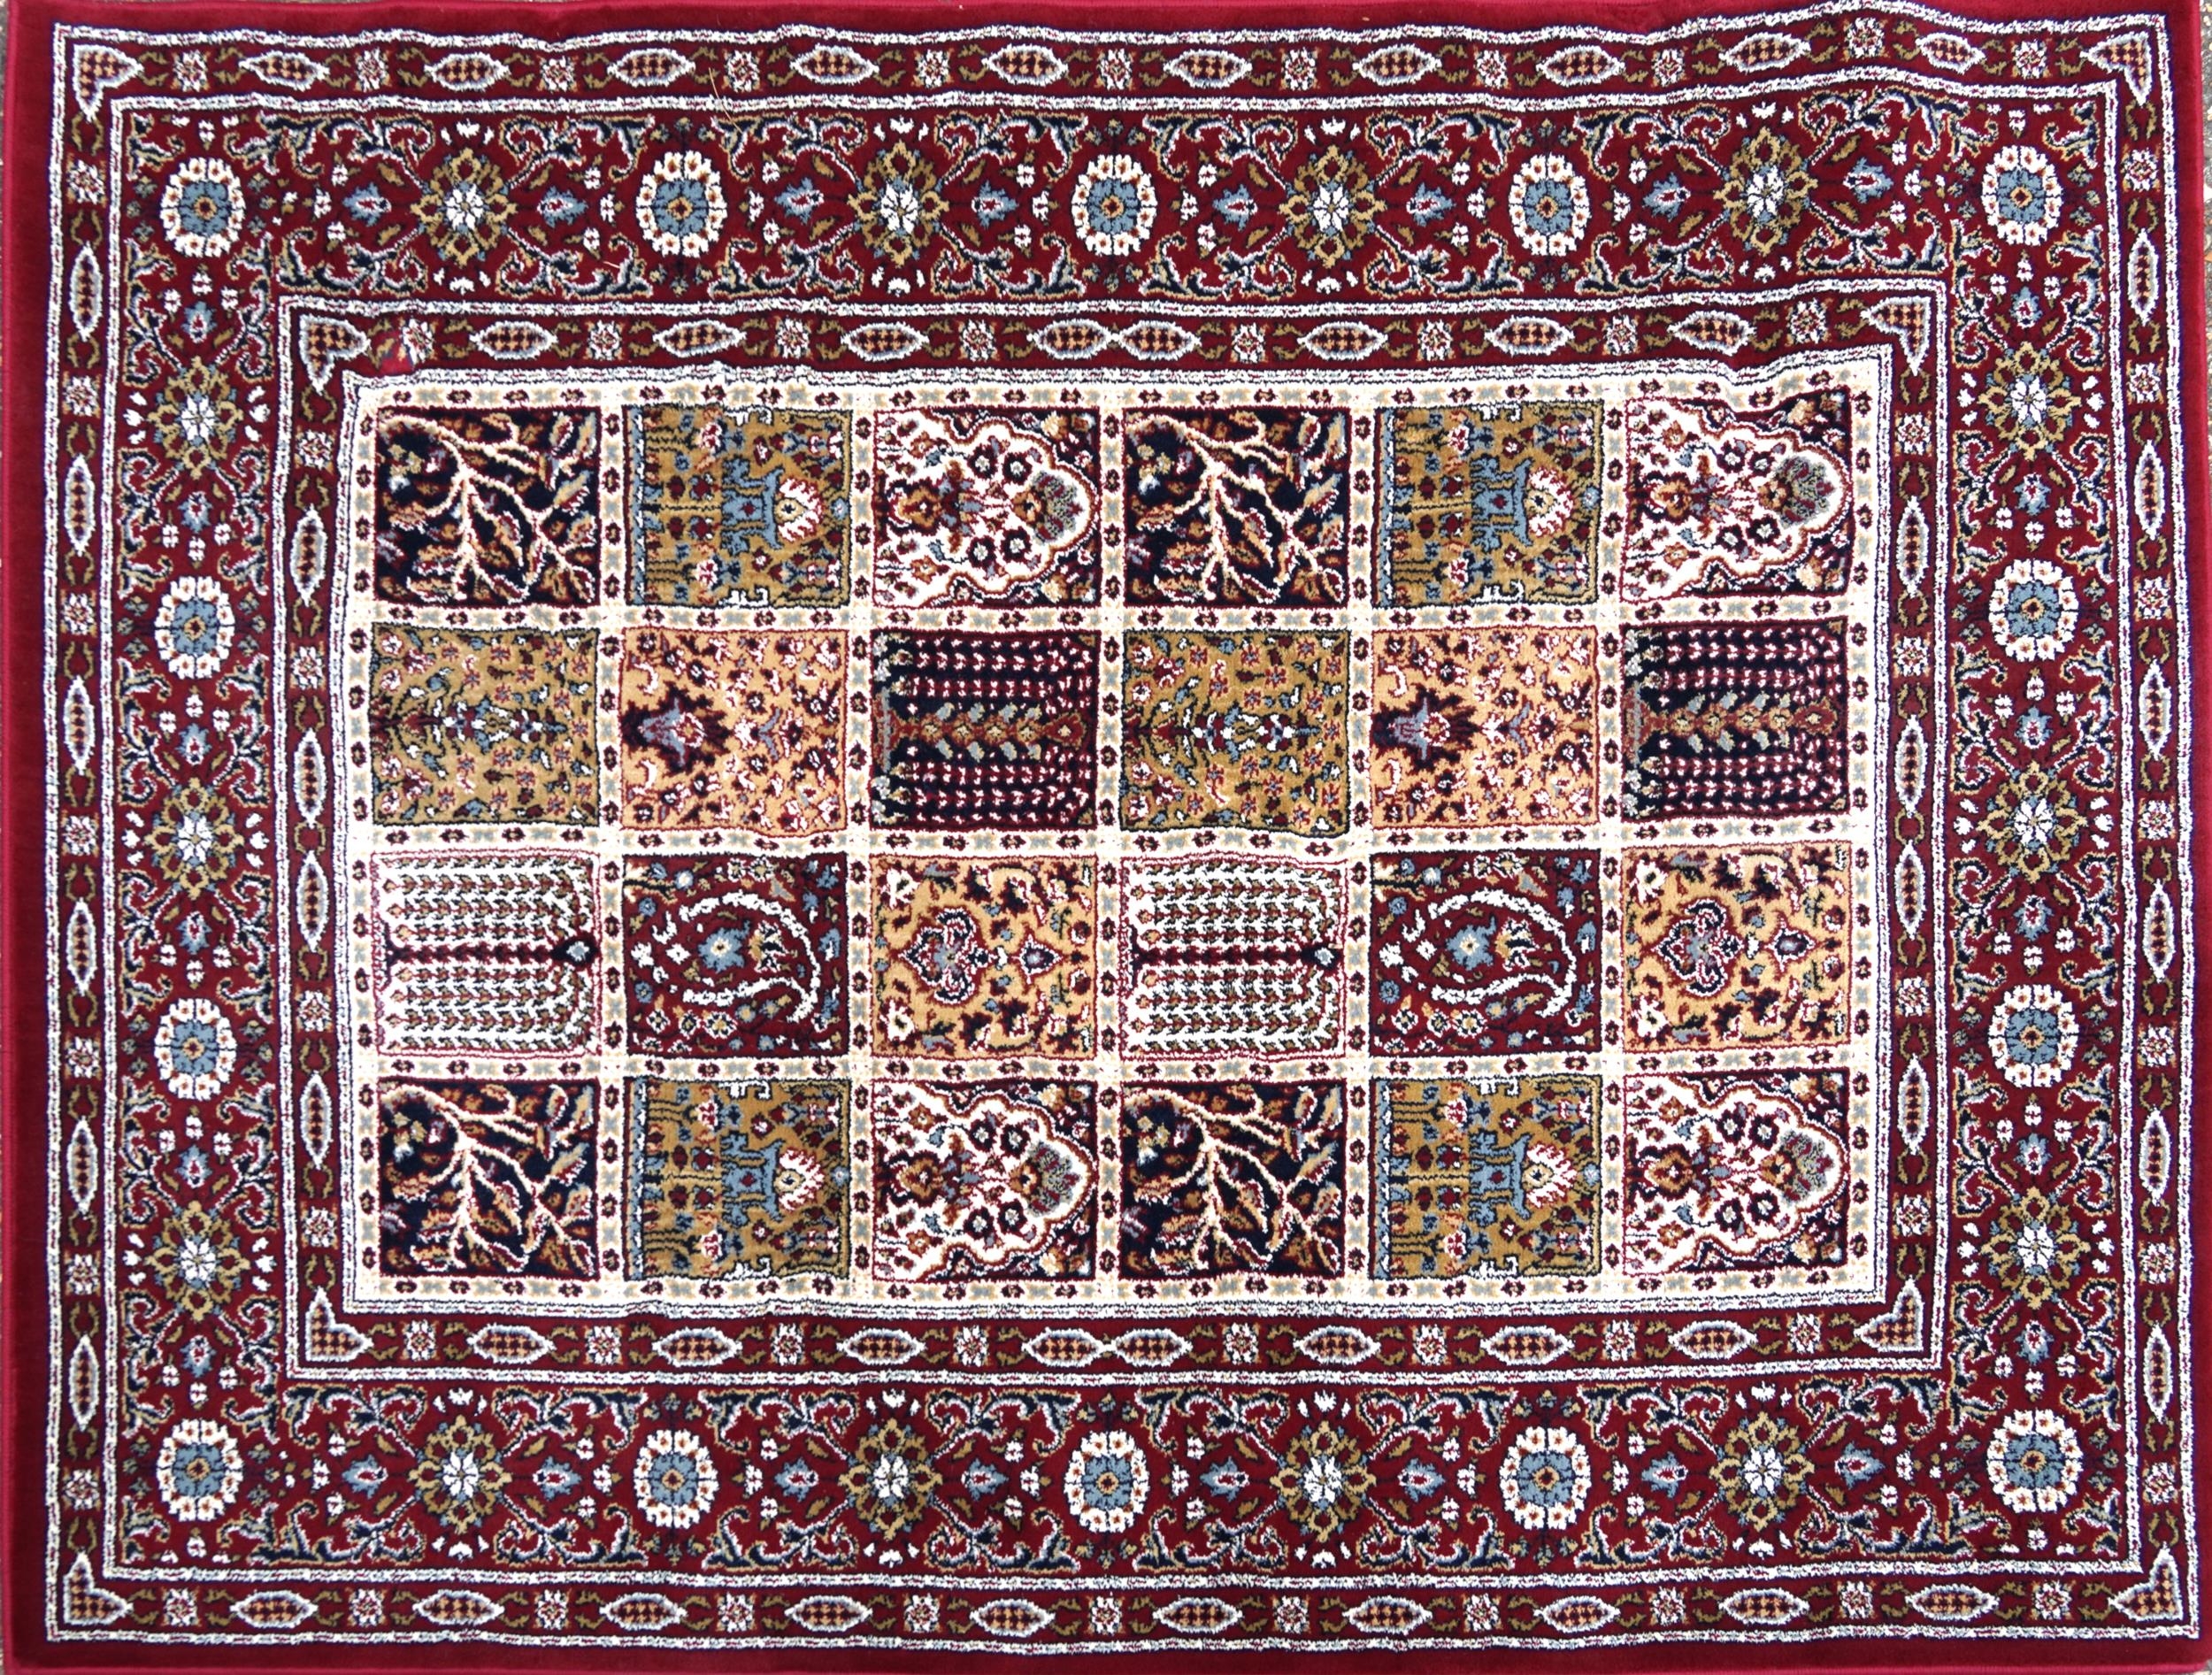 Pair of rectangular Persian style Valby Ruta rugs, each 195cm x 133cm - Image 8 of 13